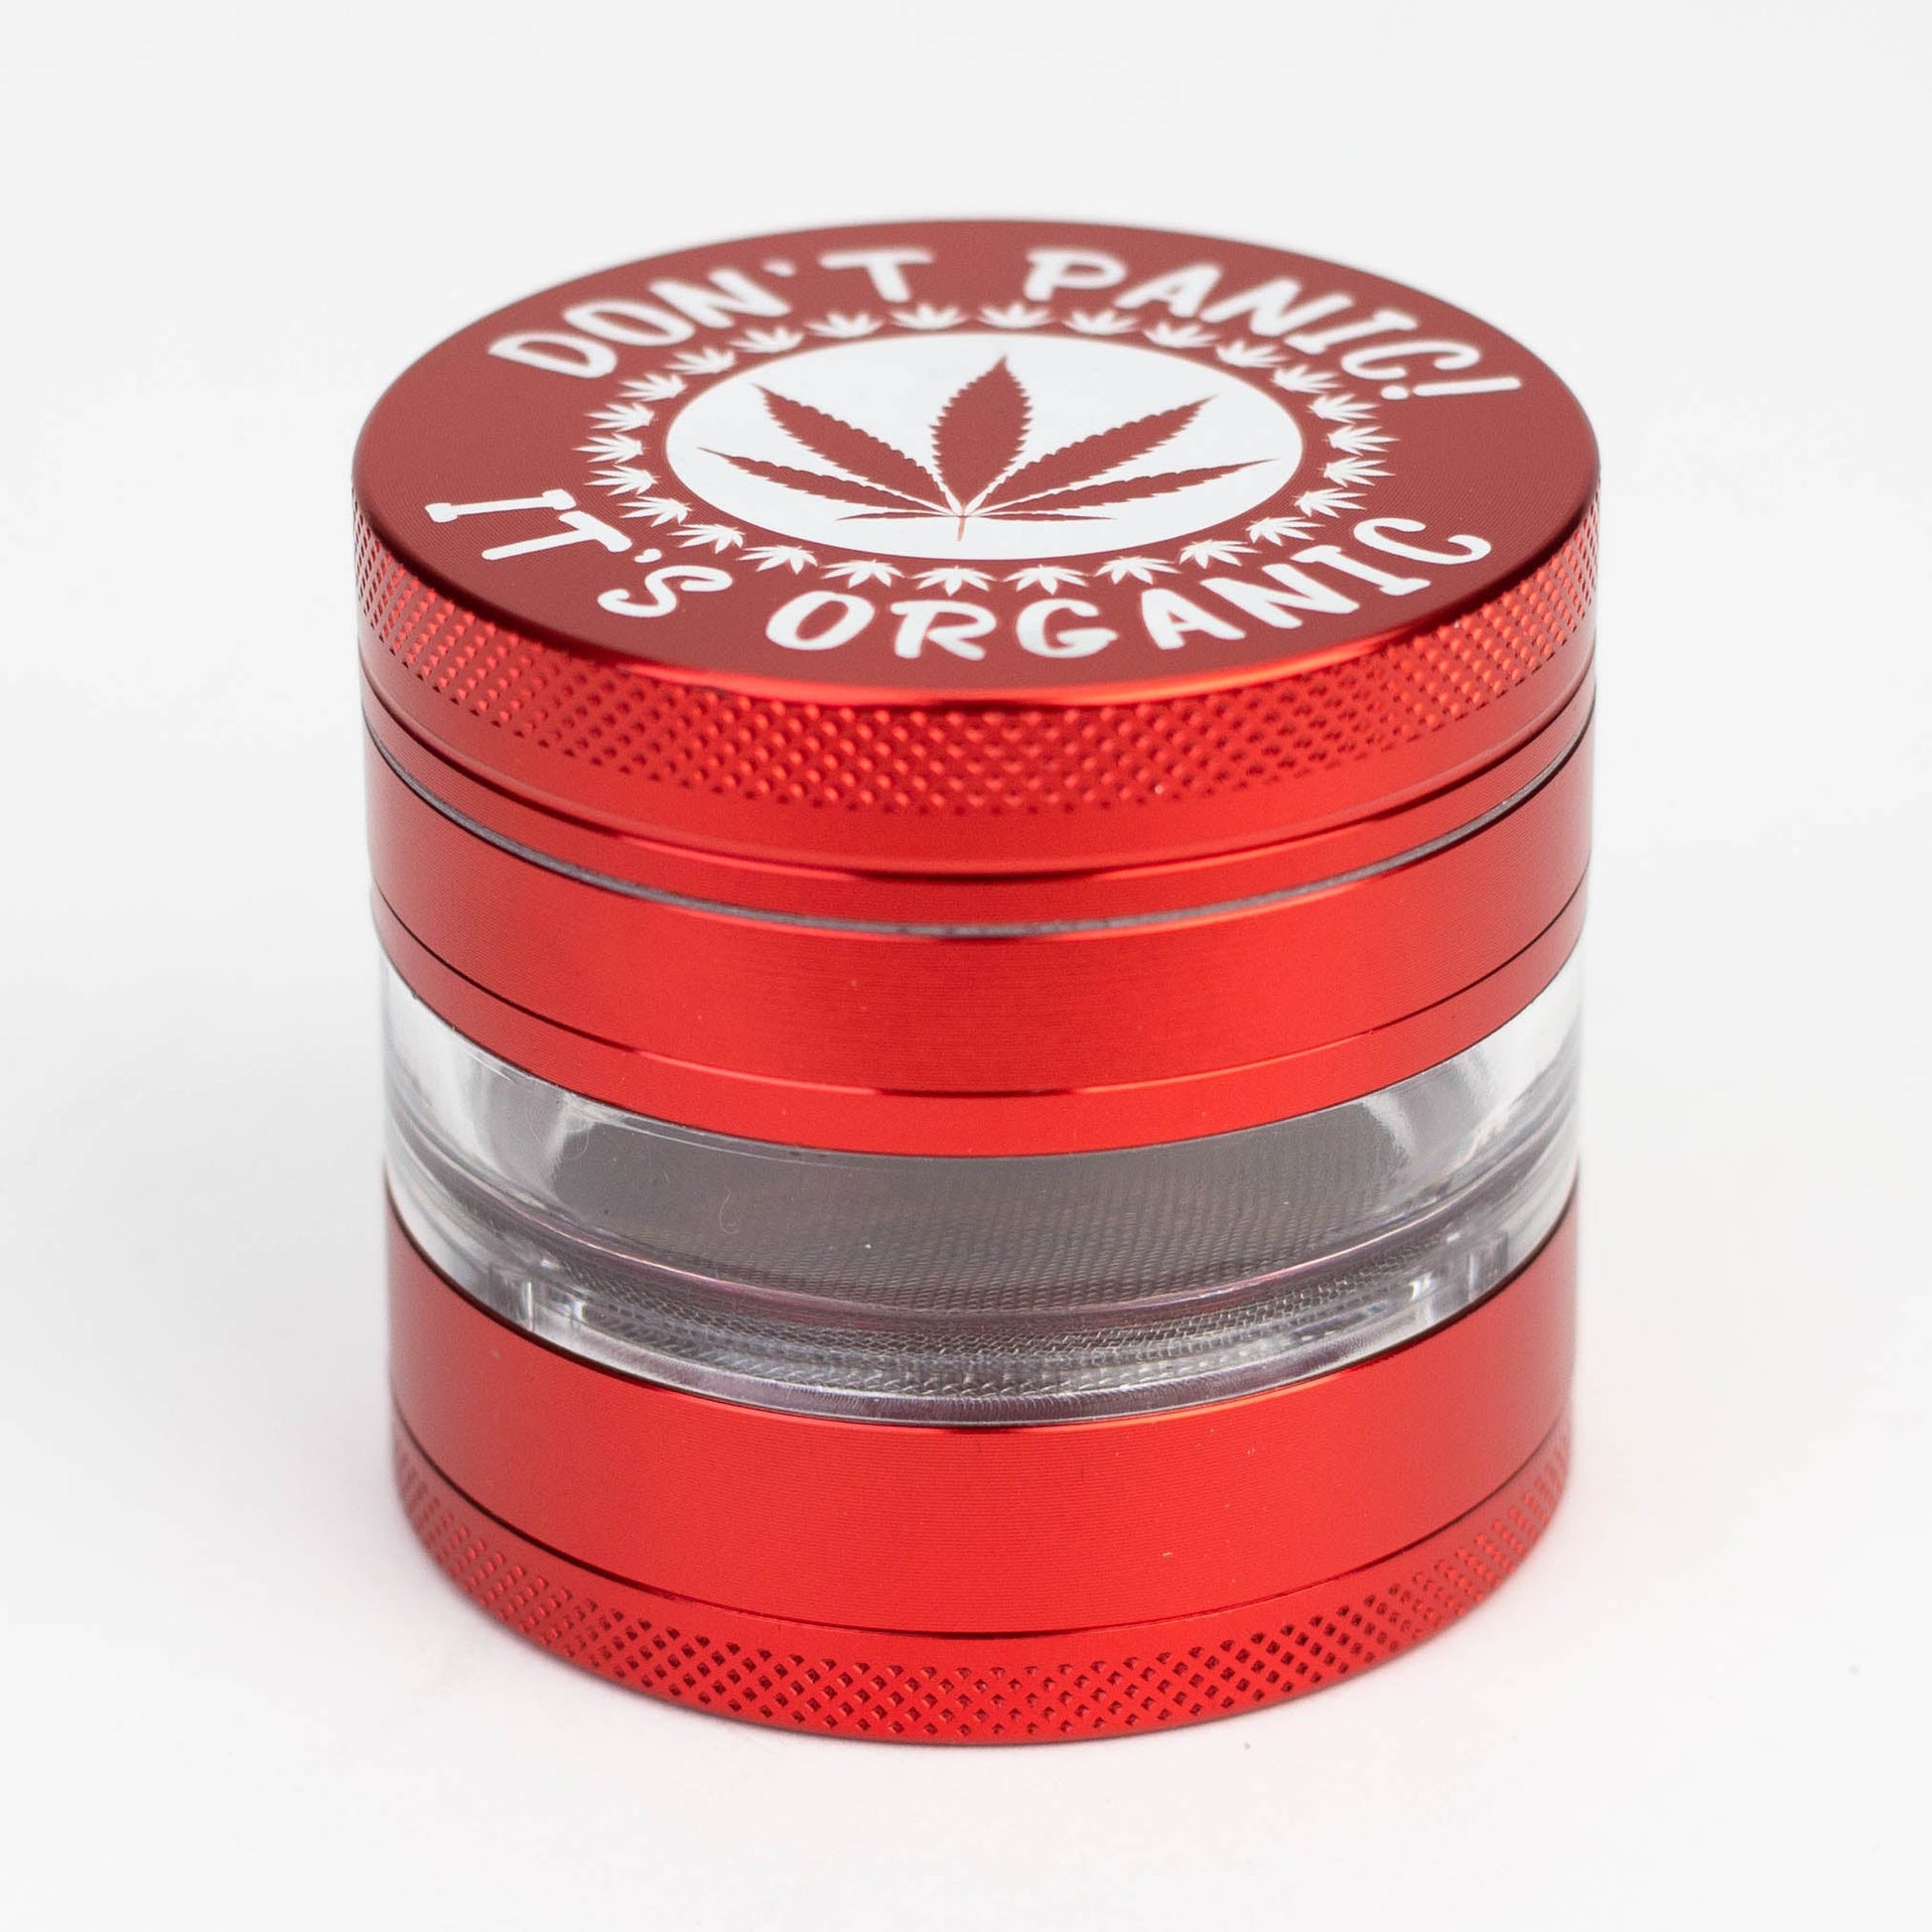 Heavy Duty Large "Don't Panic It's Organic" 4 Parts Weed Grinder Engraved in Canada_17